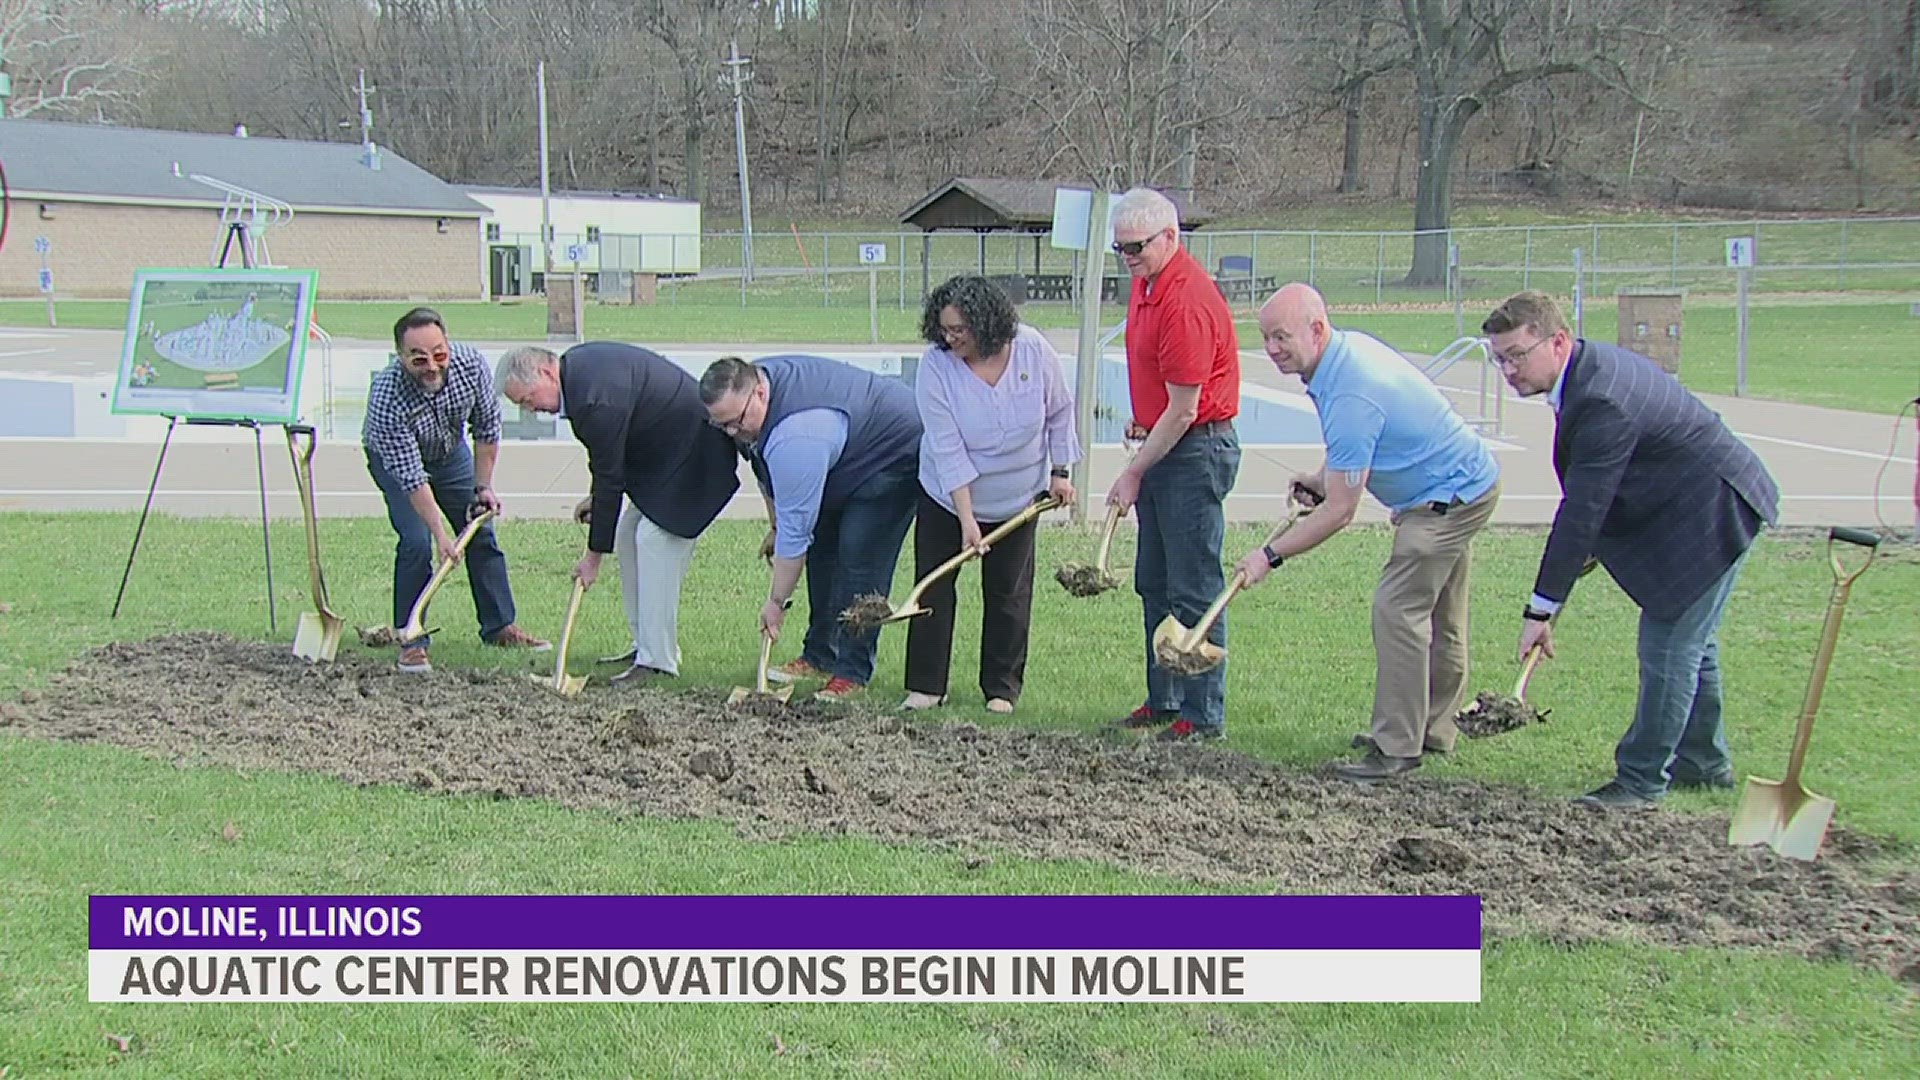 Moline Park officials say construction for the nearly $7M project is expected to wrap up by Memorial Day weekend in 2024.